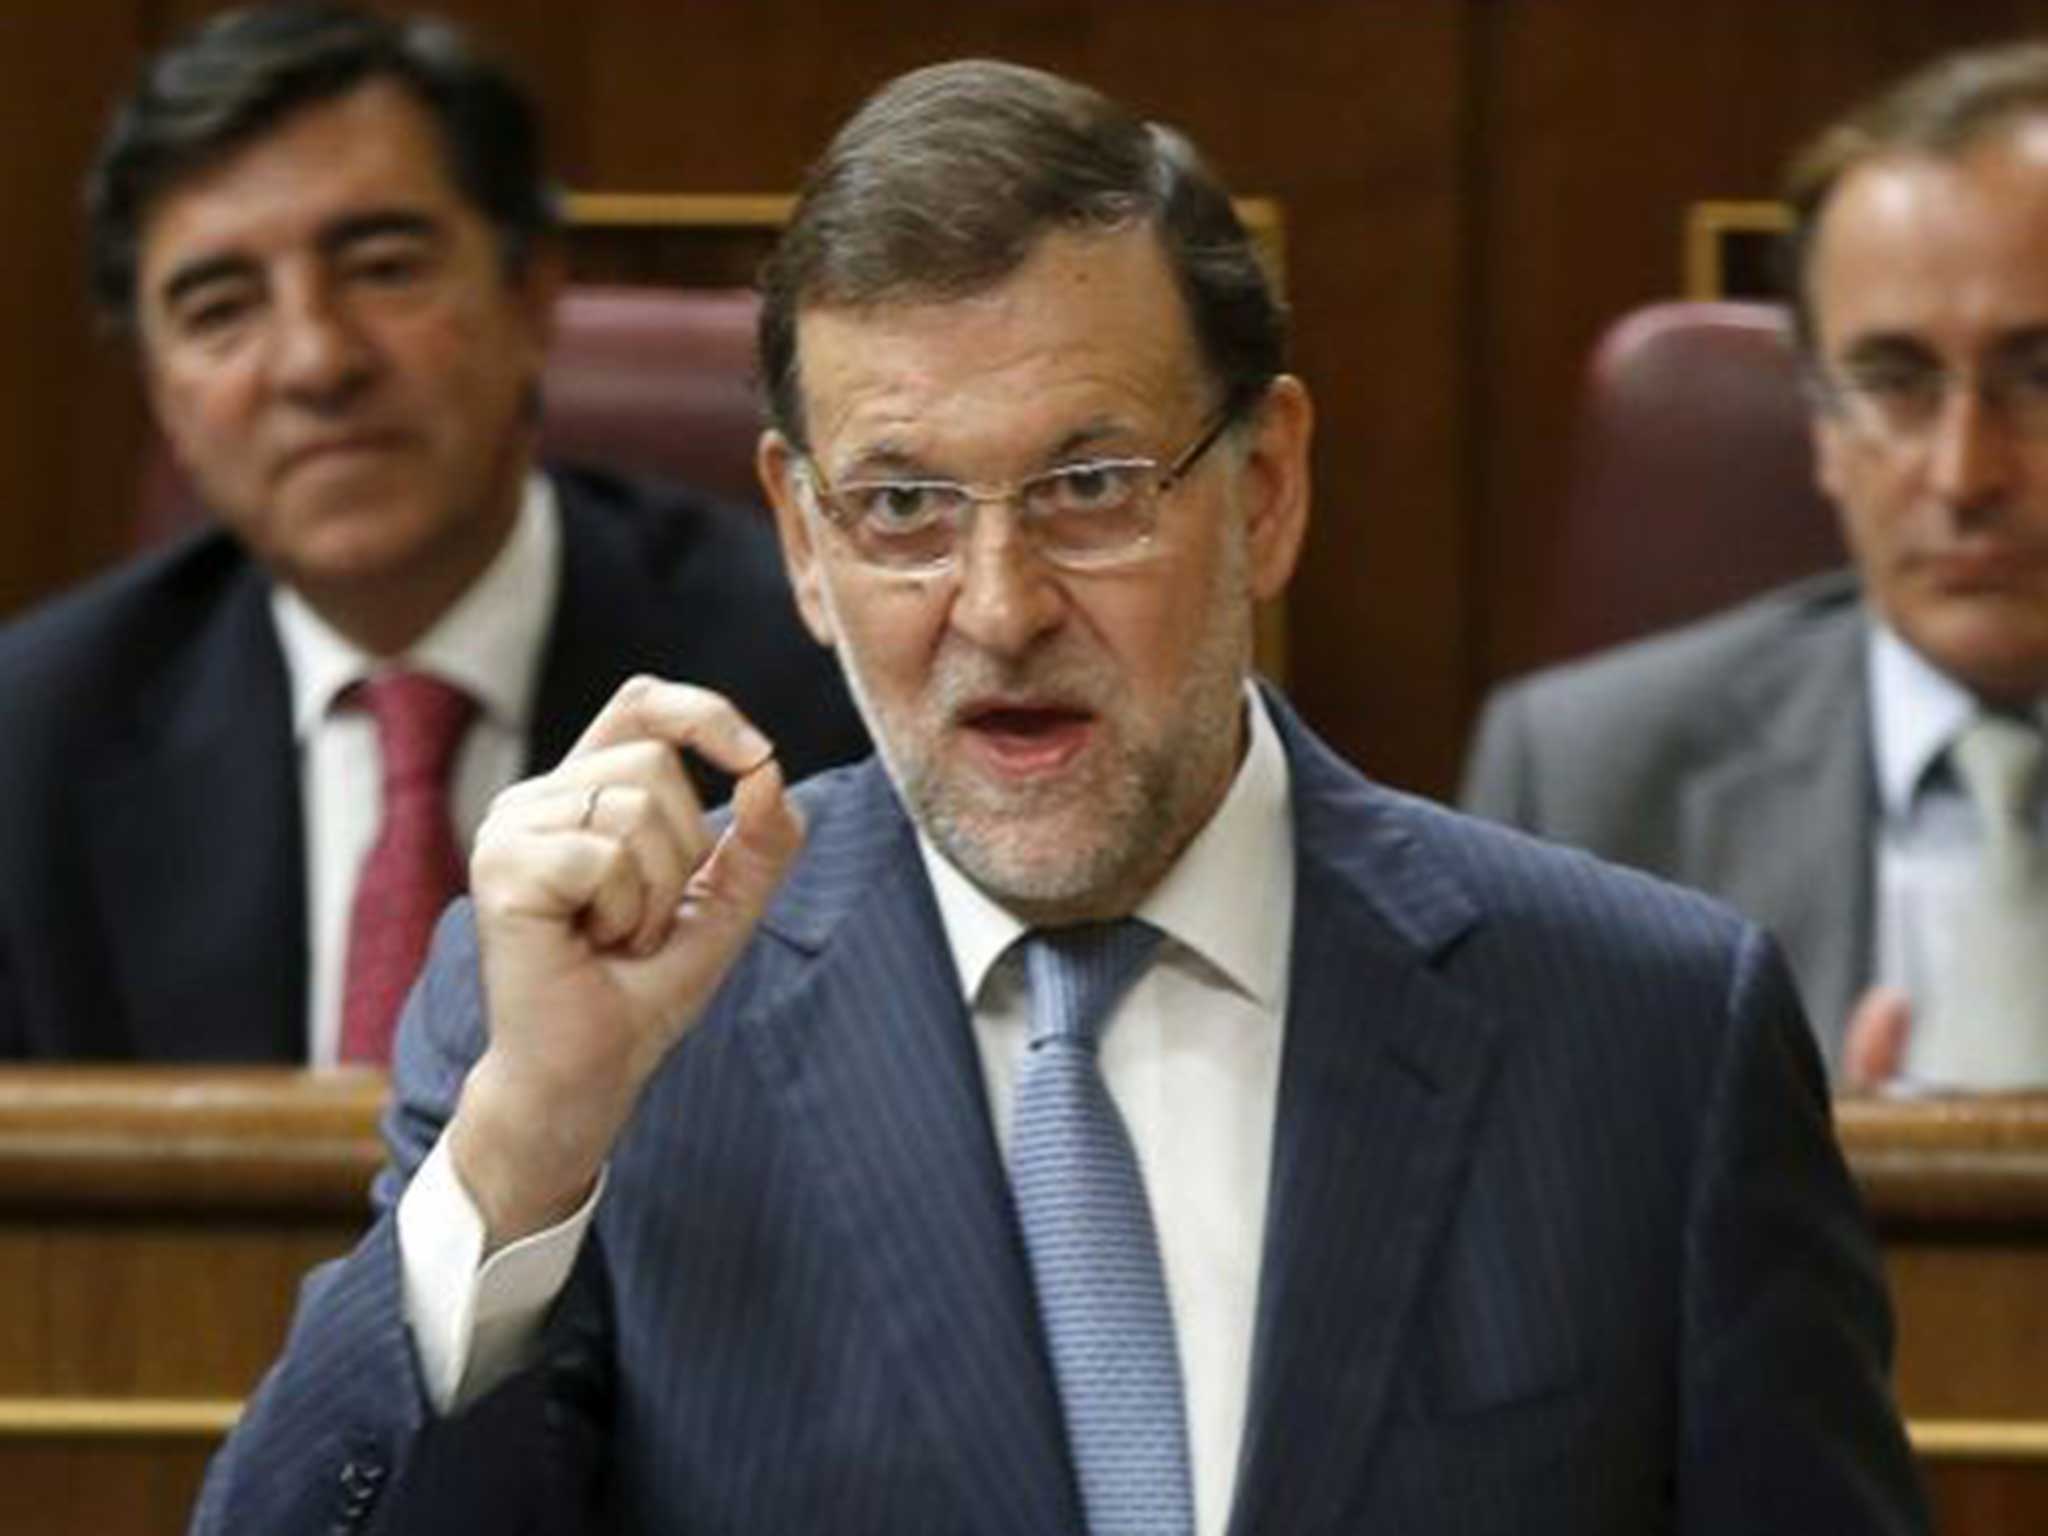 Spanish PM Mariano Rajoy answers questions, Mr Rajoy has said Scotland will not be able to immediately join the EU